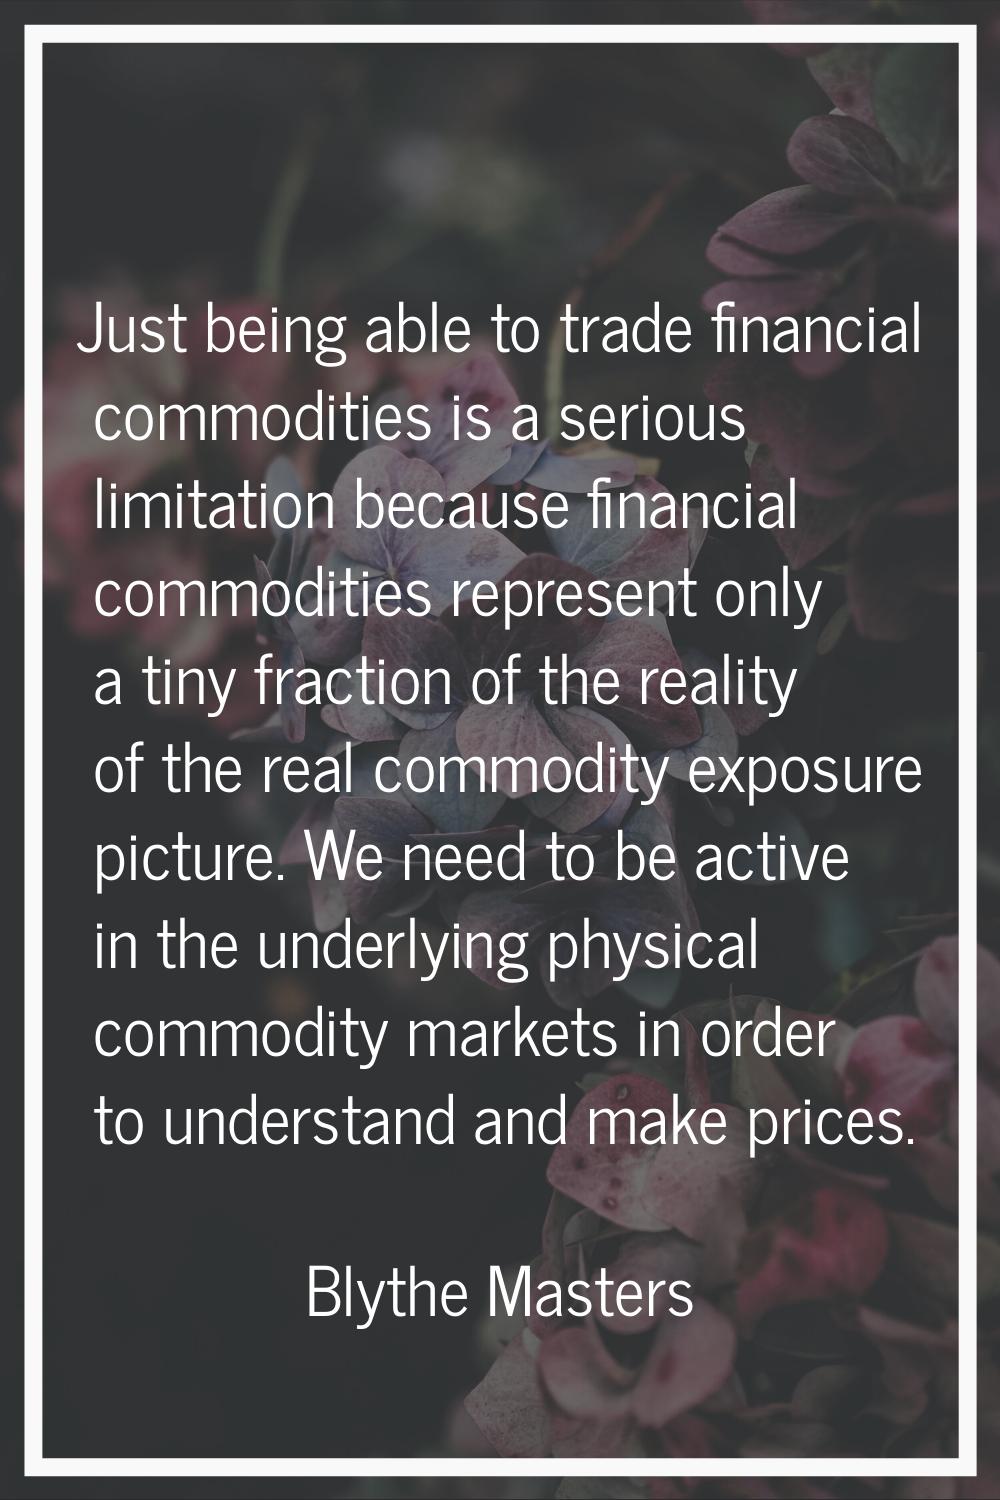 Just being able to trade financial commodities is a serious limitation because financial commoditie